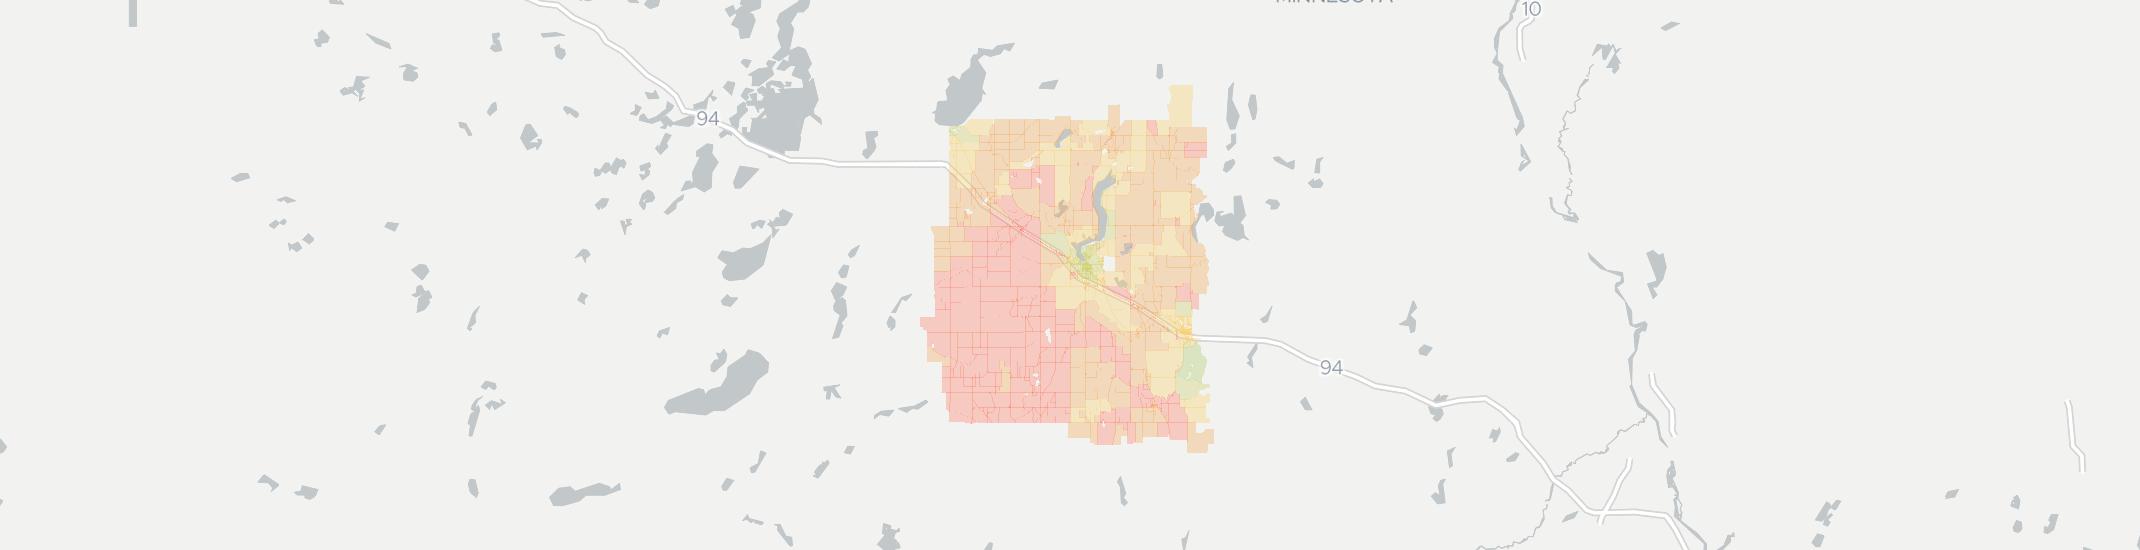 Sauk Centre Internet Competition Map. Click for interactive map.